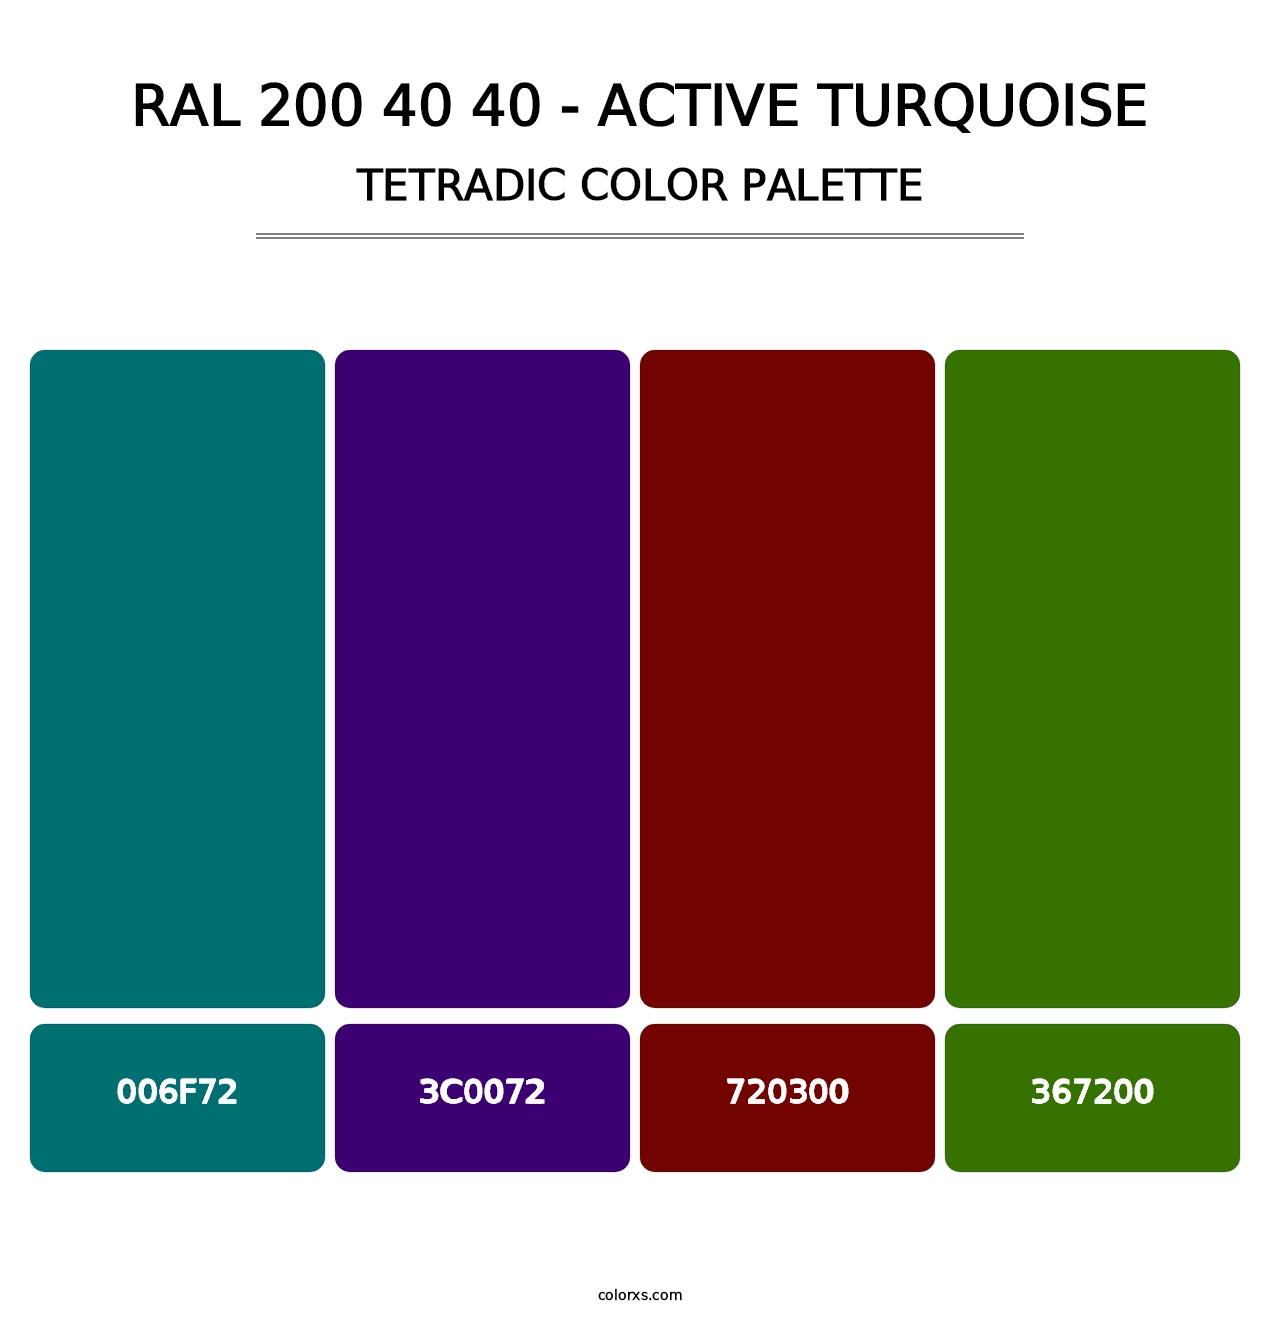 RAL 200 40 40 - Active Turquoise - Tetradic Color Palette